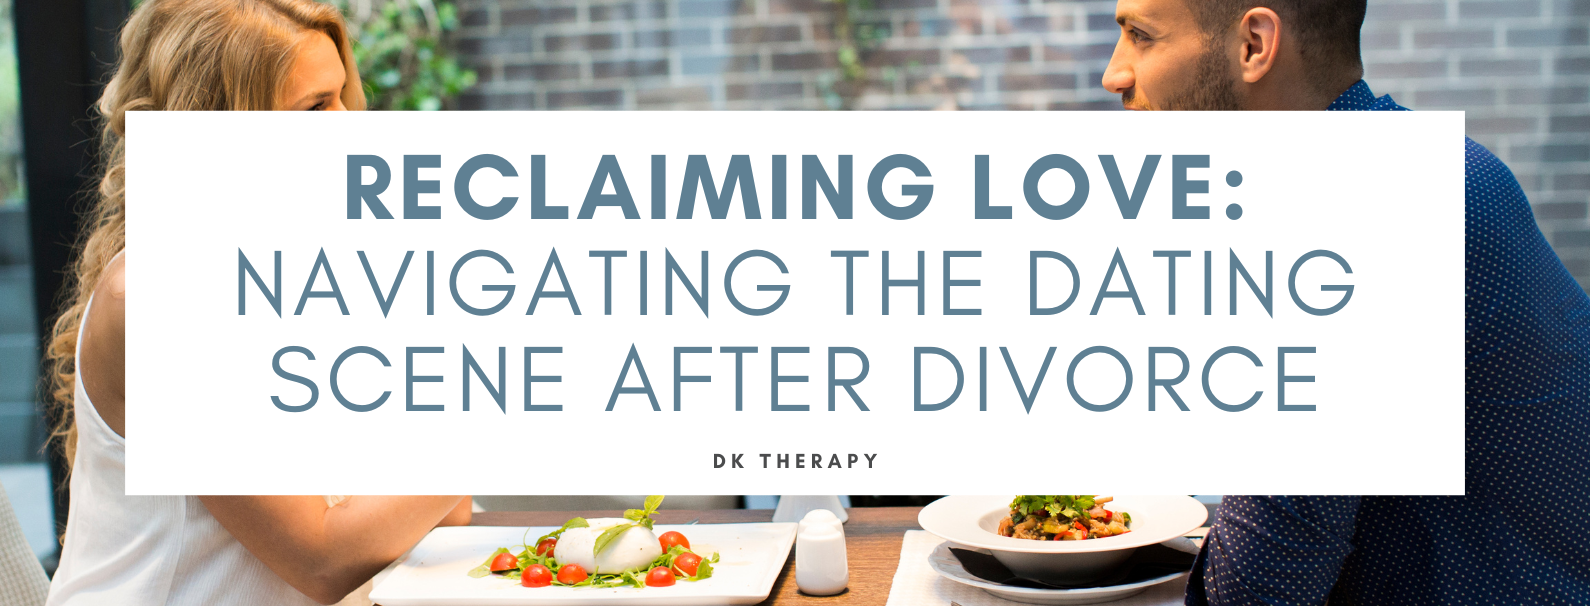 Reclaiming Love: Navigating the Dating Scene After Divorce